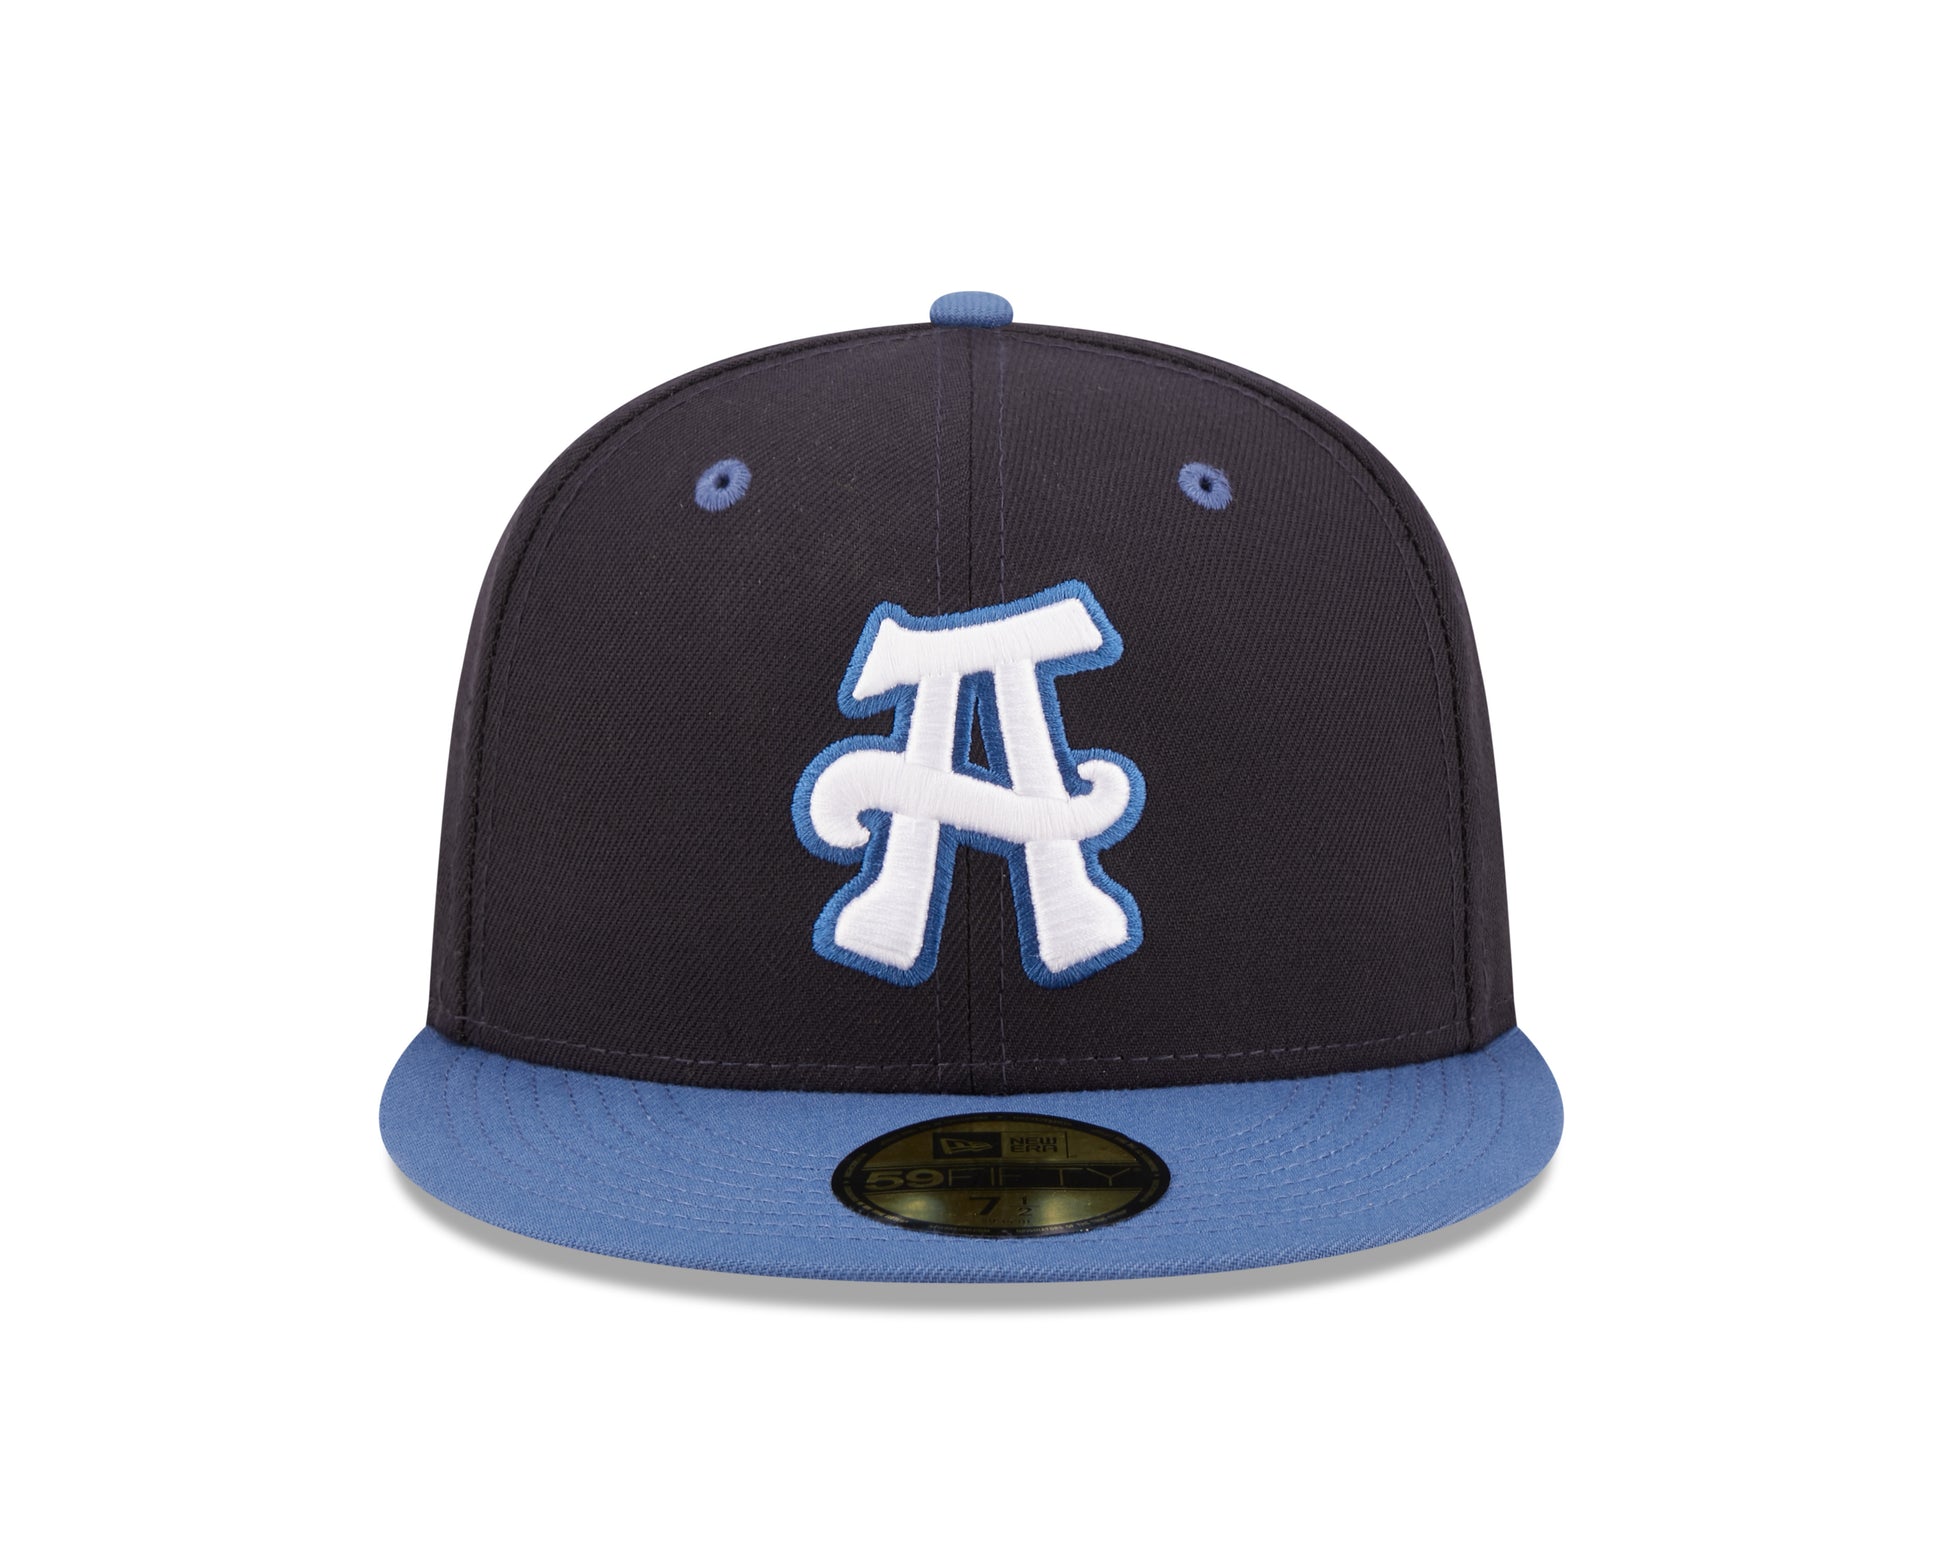 New Era - 59fifty Fitted - MiLB - AC Perf - Asheville Tourists - Navy - Headz Up 